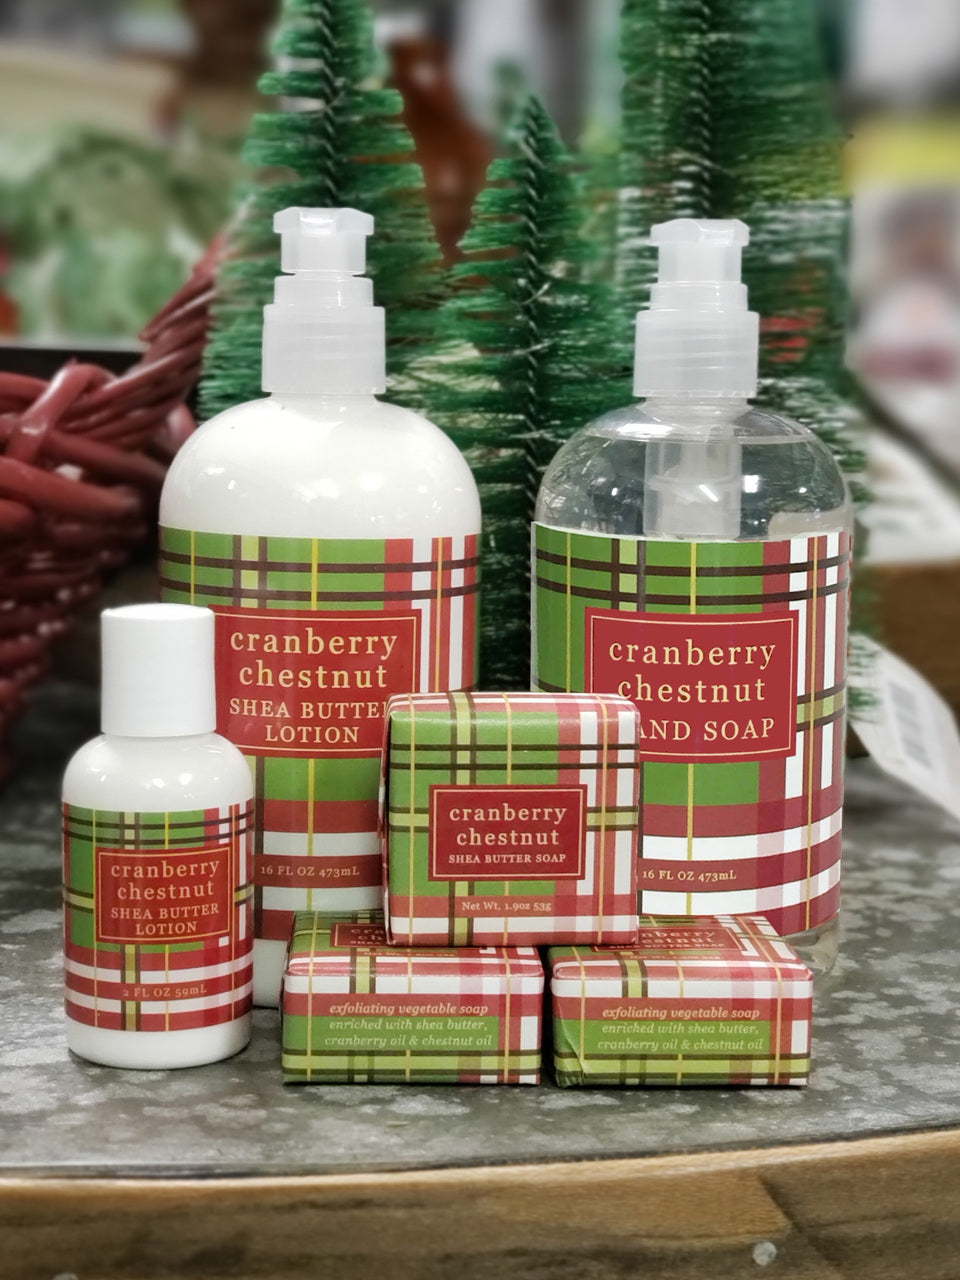 Cranberry Chestnut Spa Product